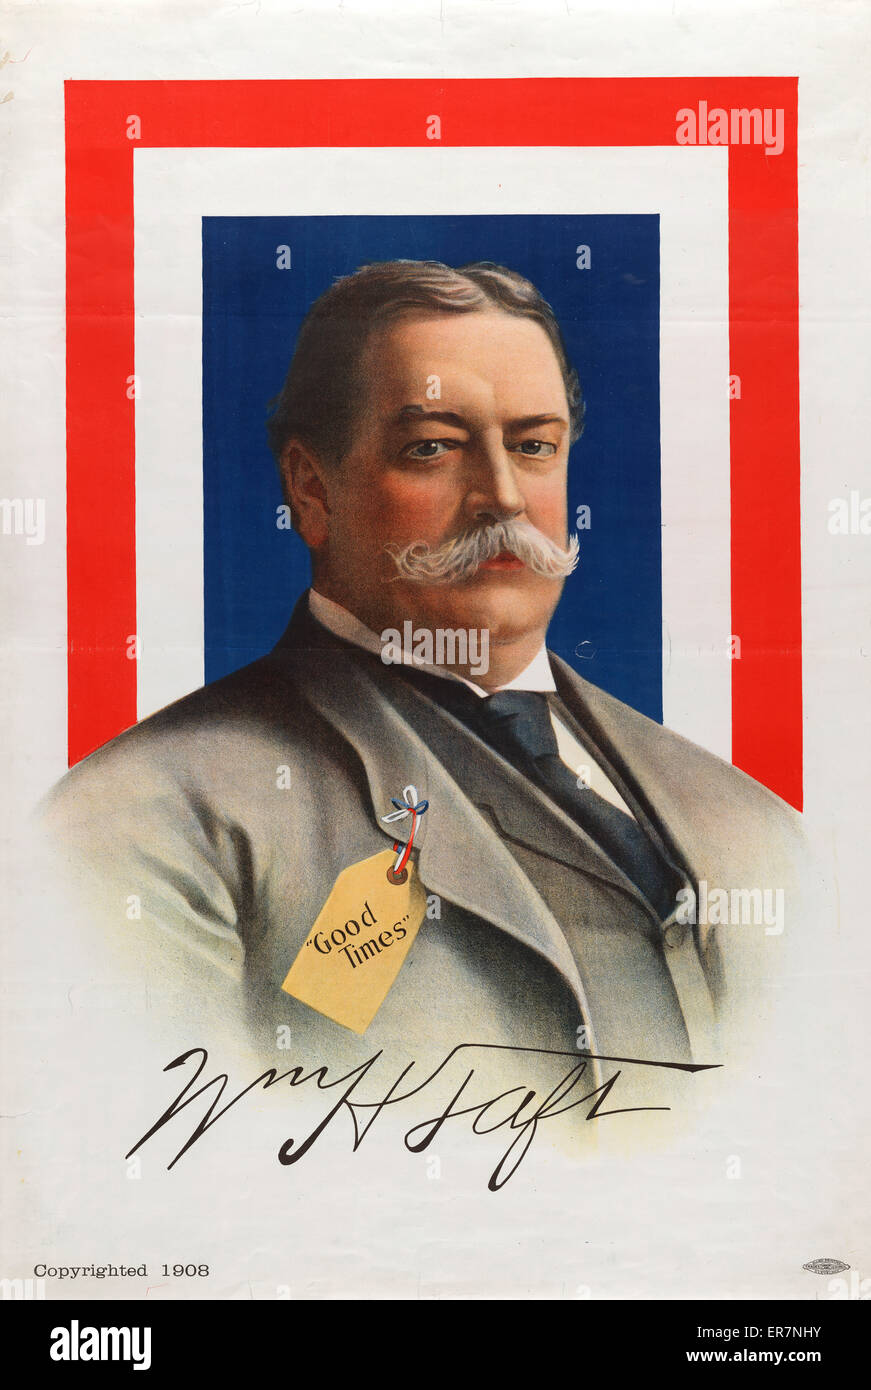 Wm. H. Taft - good times. Print shows William Howard Taft, head-and-shoulders portrait, facing slightly right, against red, white, and blue background, with Good Times printed on a label attached to his coat. Date c1908. Wm. H. Taft - good times. Print sh Stock Photo